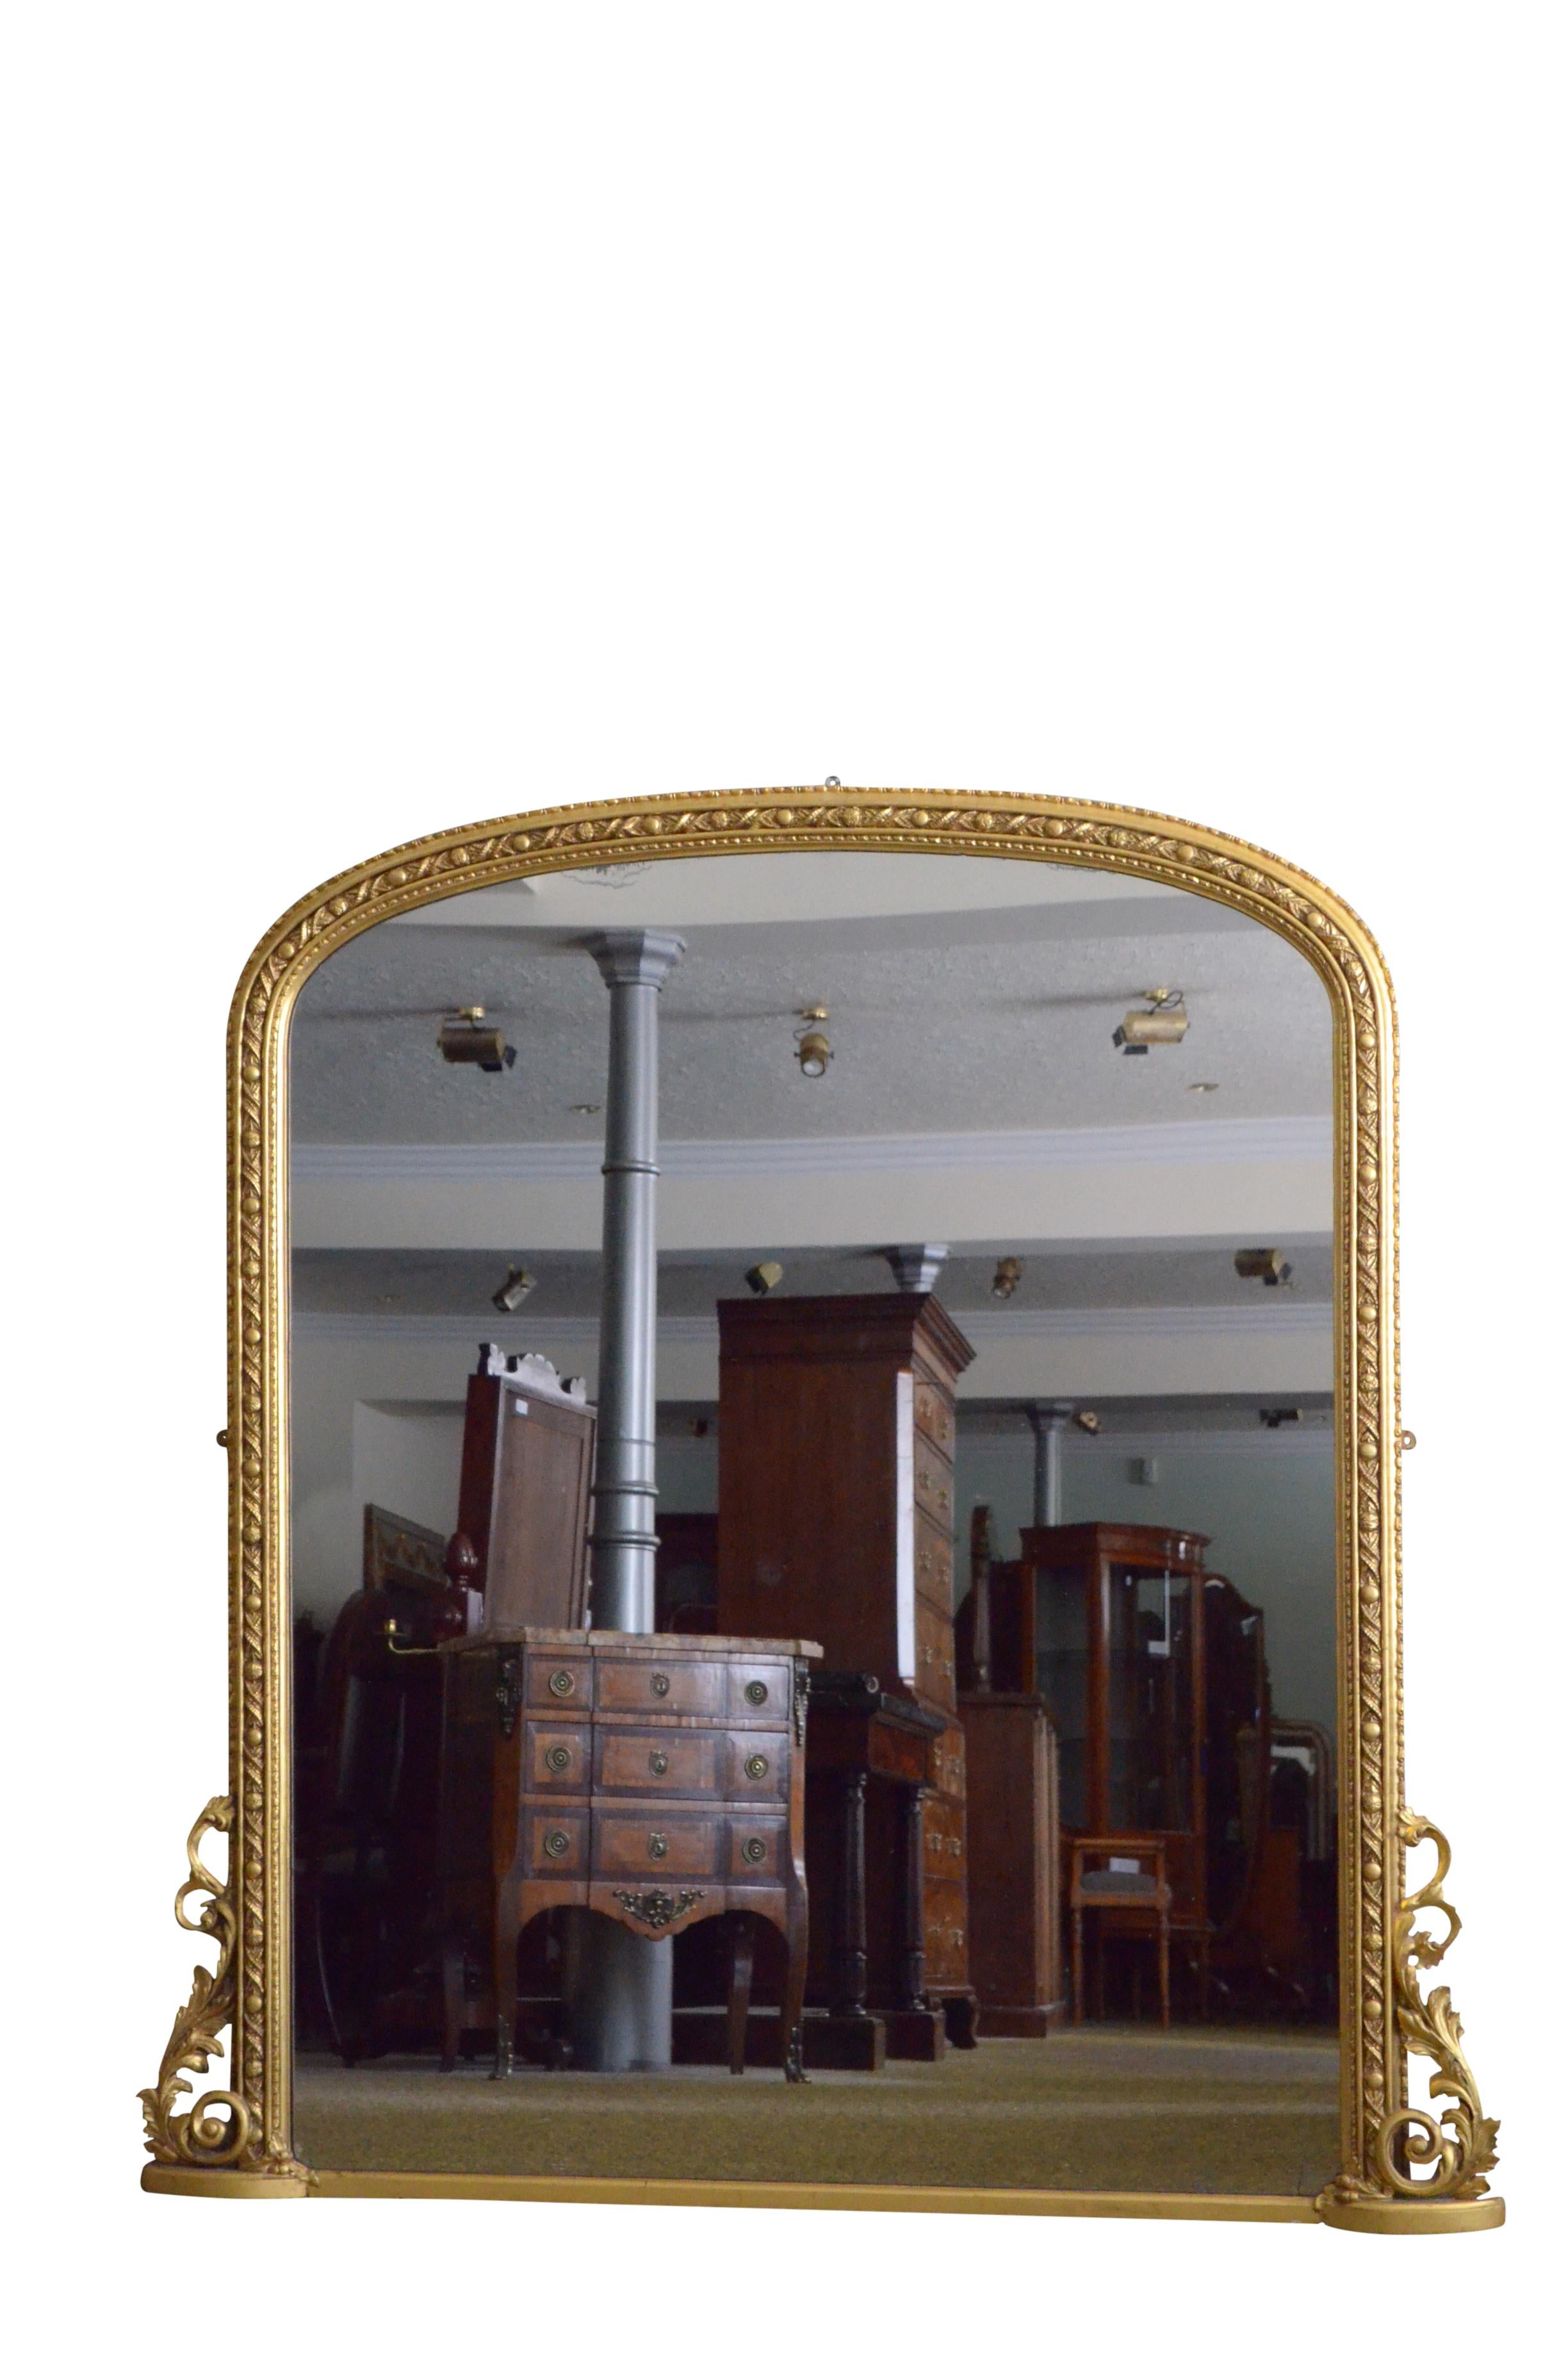 K0517 A large XIXth century gilded wall mirror of arched form, having original glass with some foxing in finely carved frame with twisted floral motifs, harebells to the edge and elaborate floral scrolls to the base. This antique mirror is in